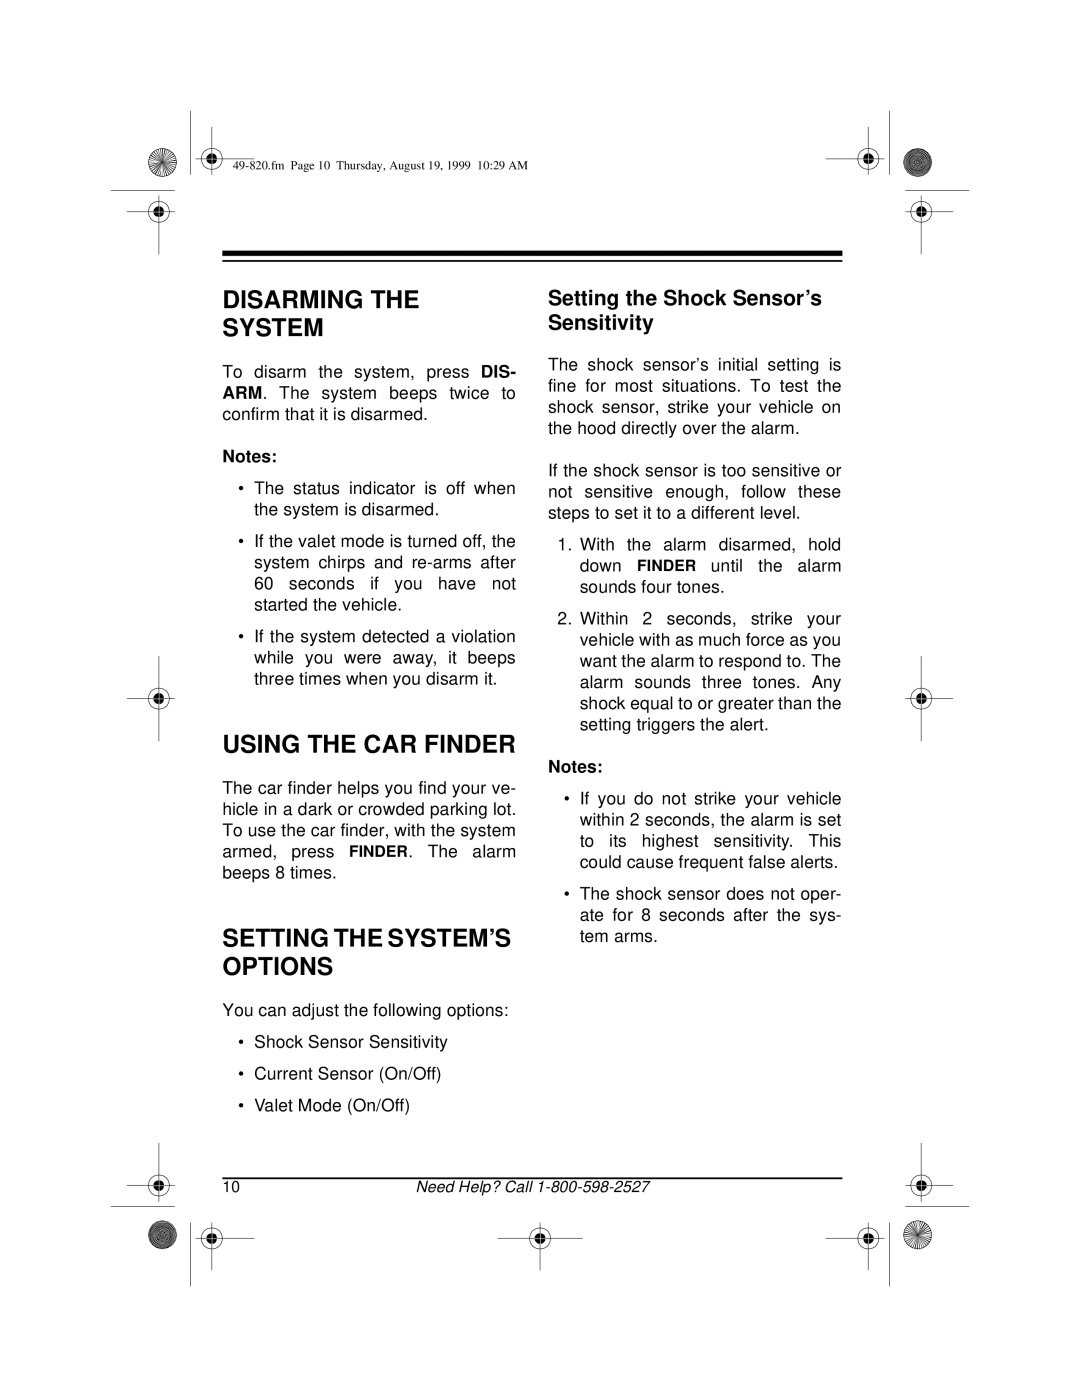 Radio Shack RS-2000 owner manual Disarming The System, Using The Car Finder, Setting The System’S Options 